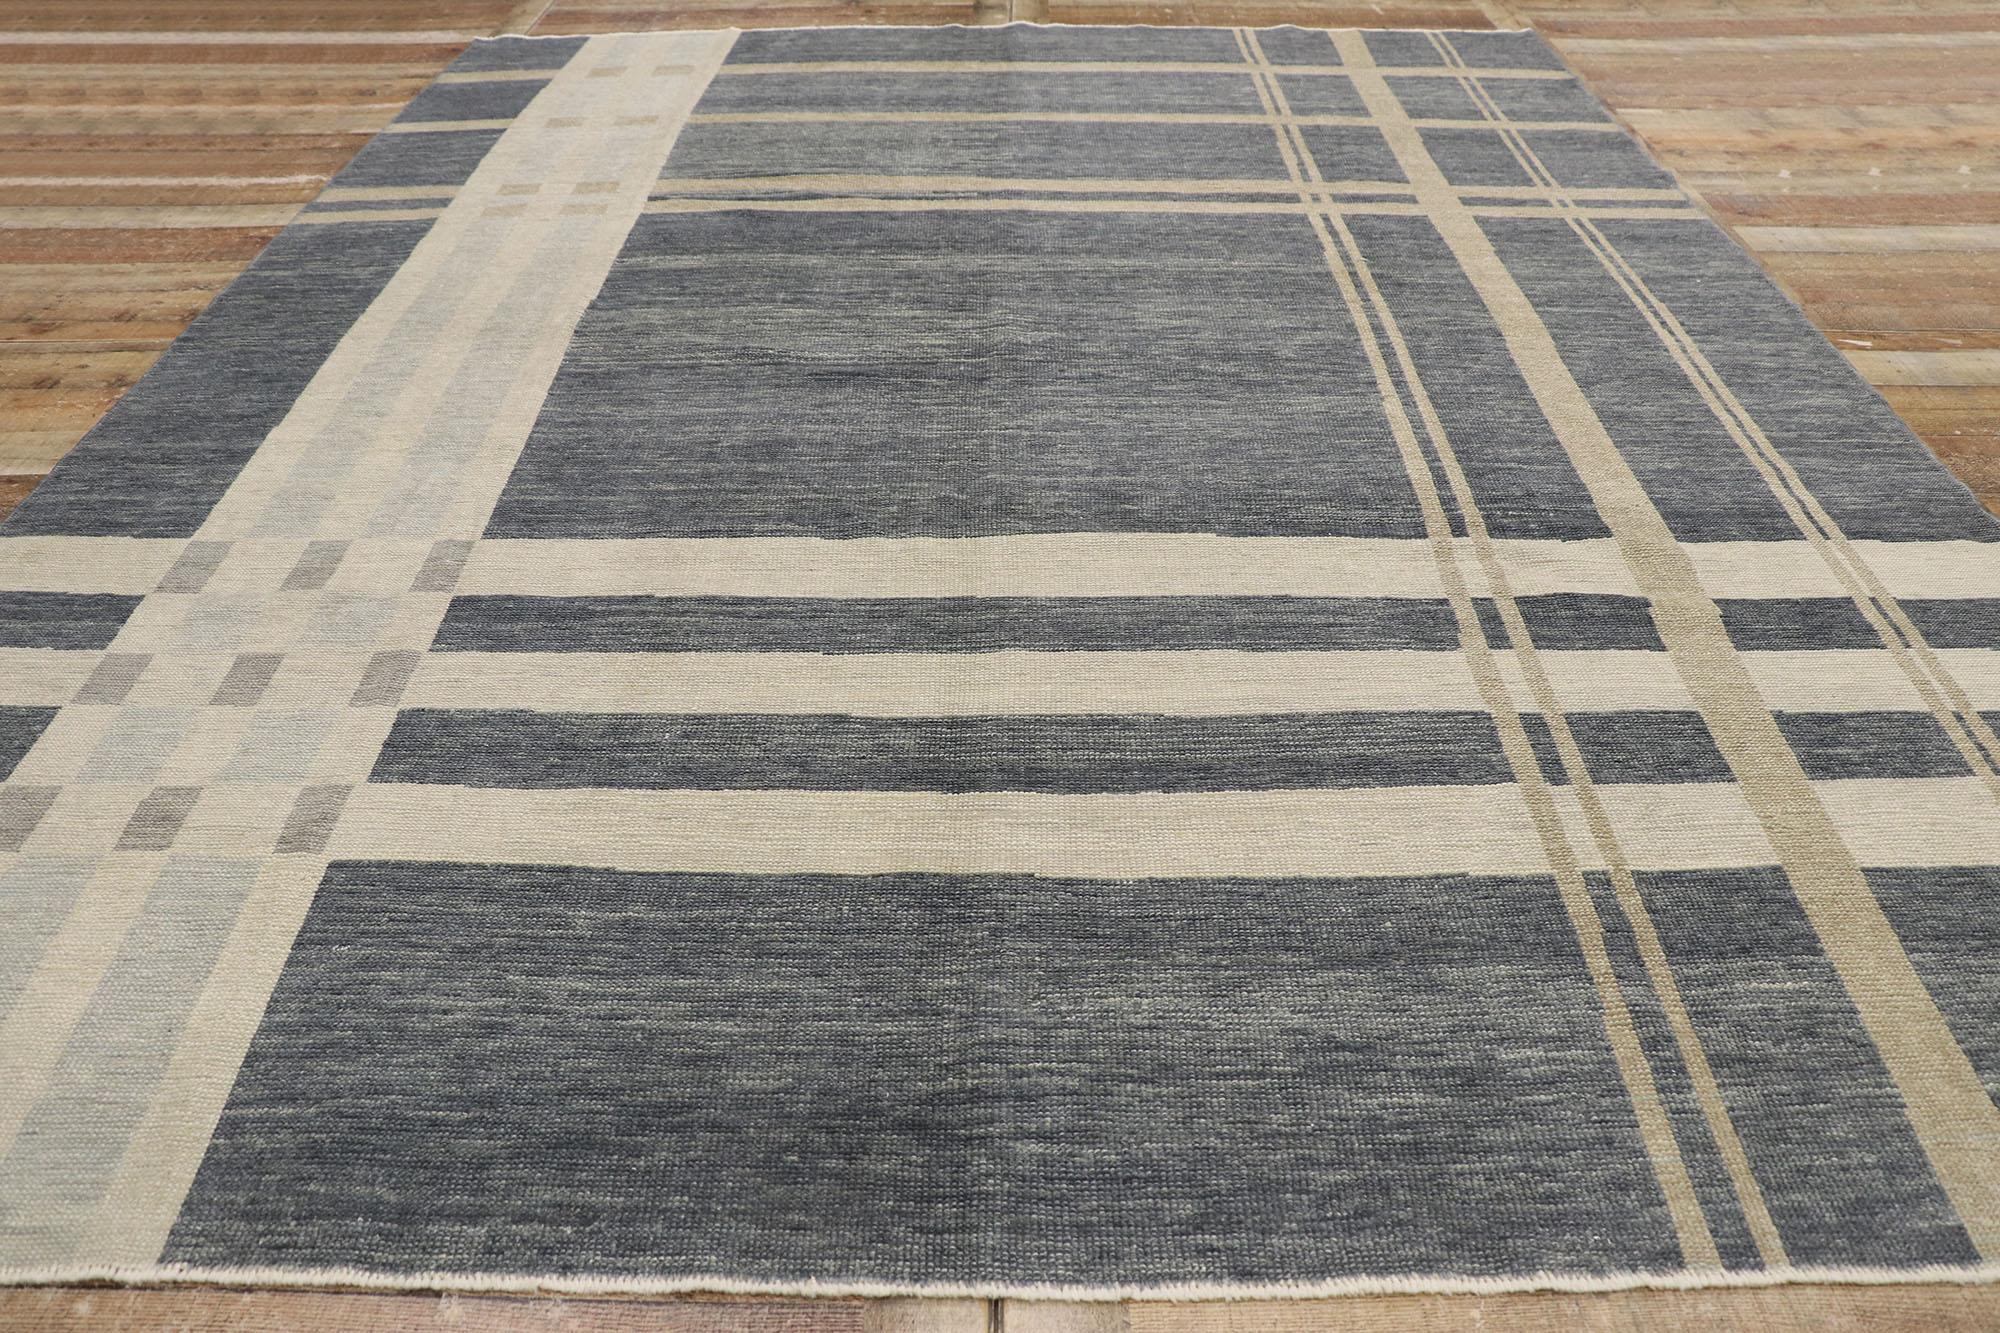 Wool New Modern Gray Plaid Tartan Rug with Ivy League Style For Sale